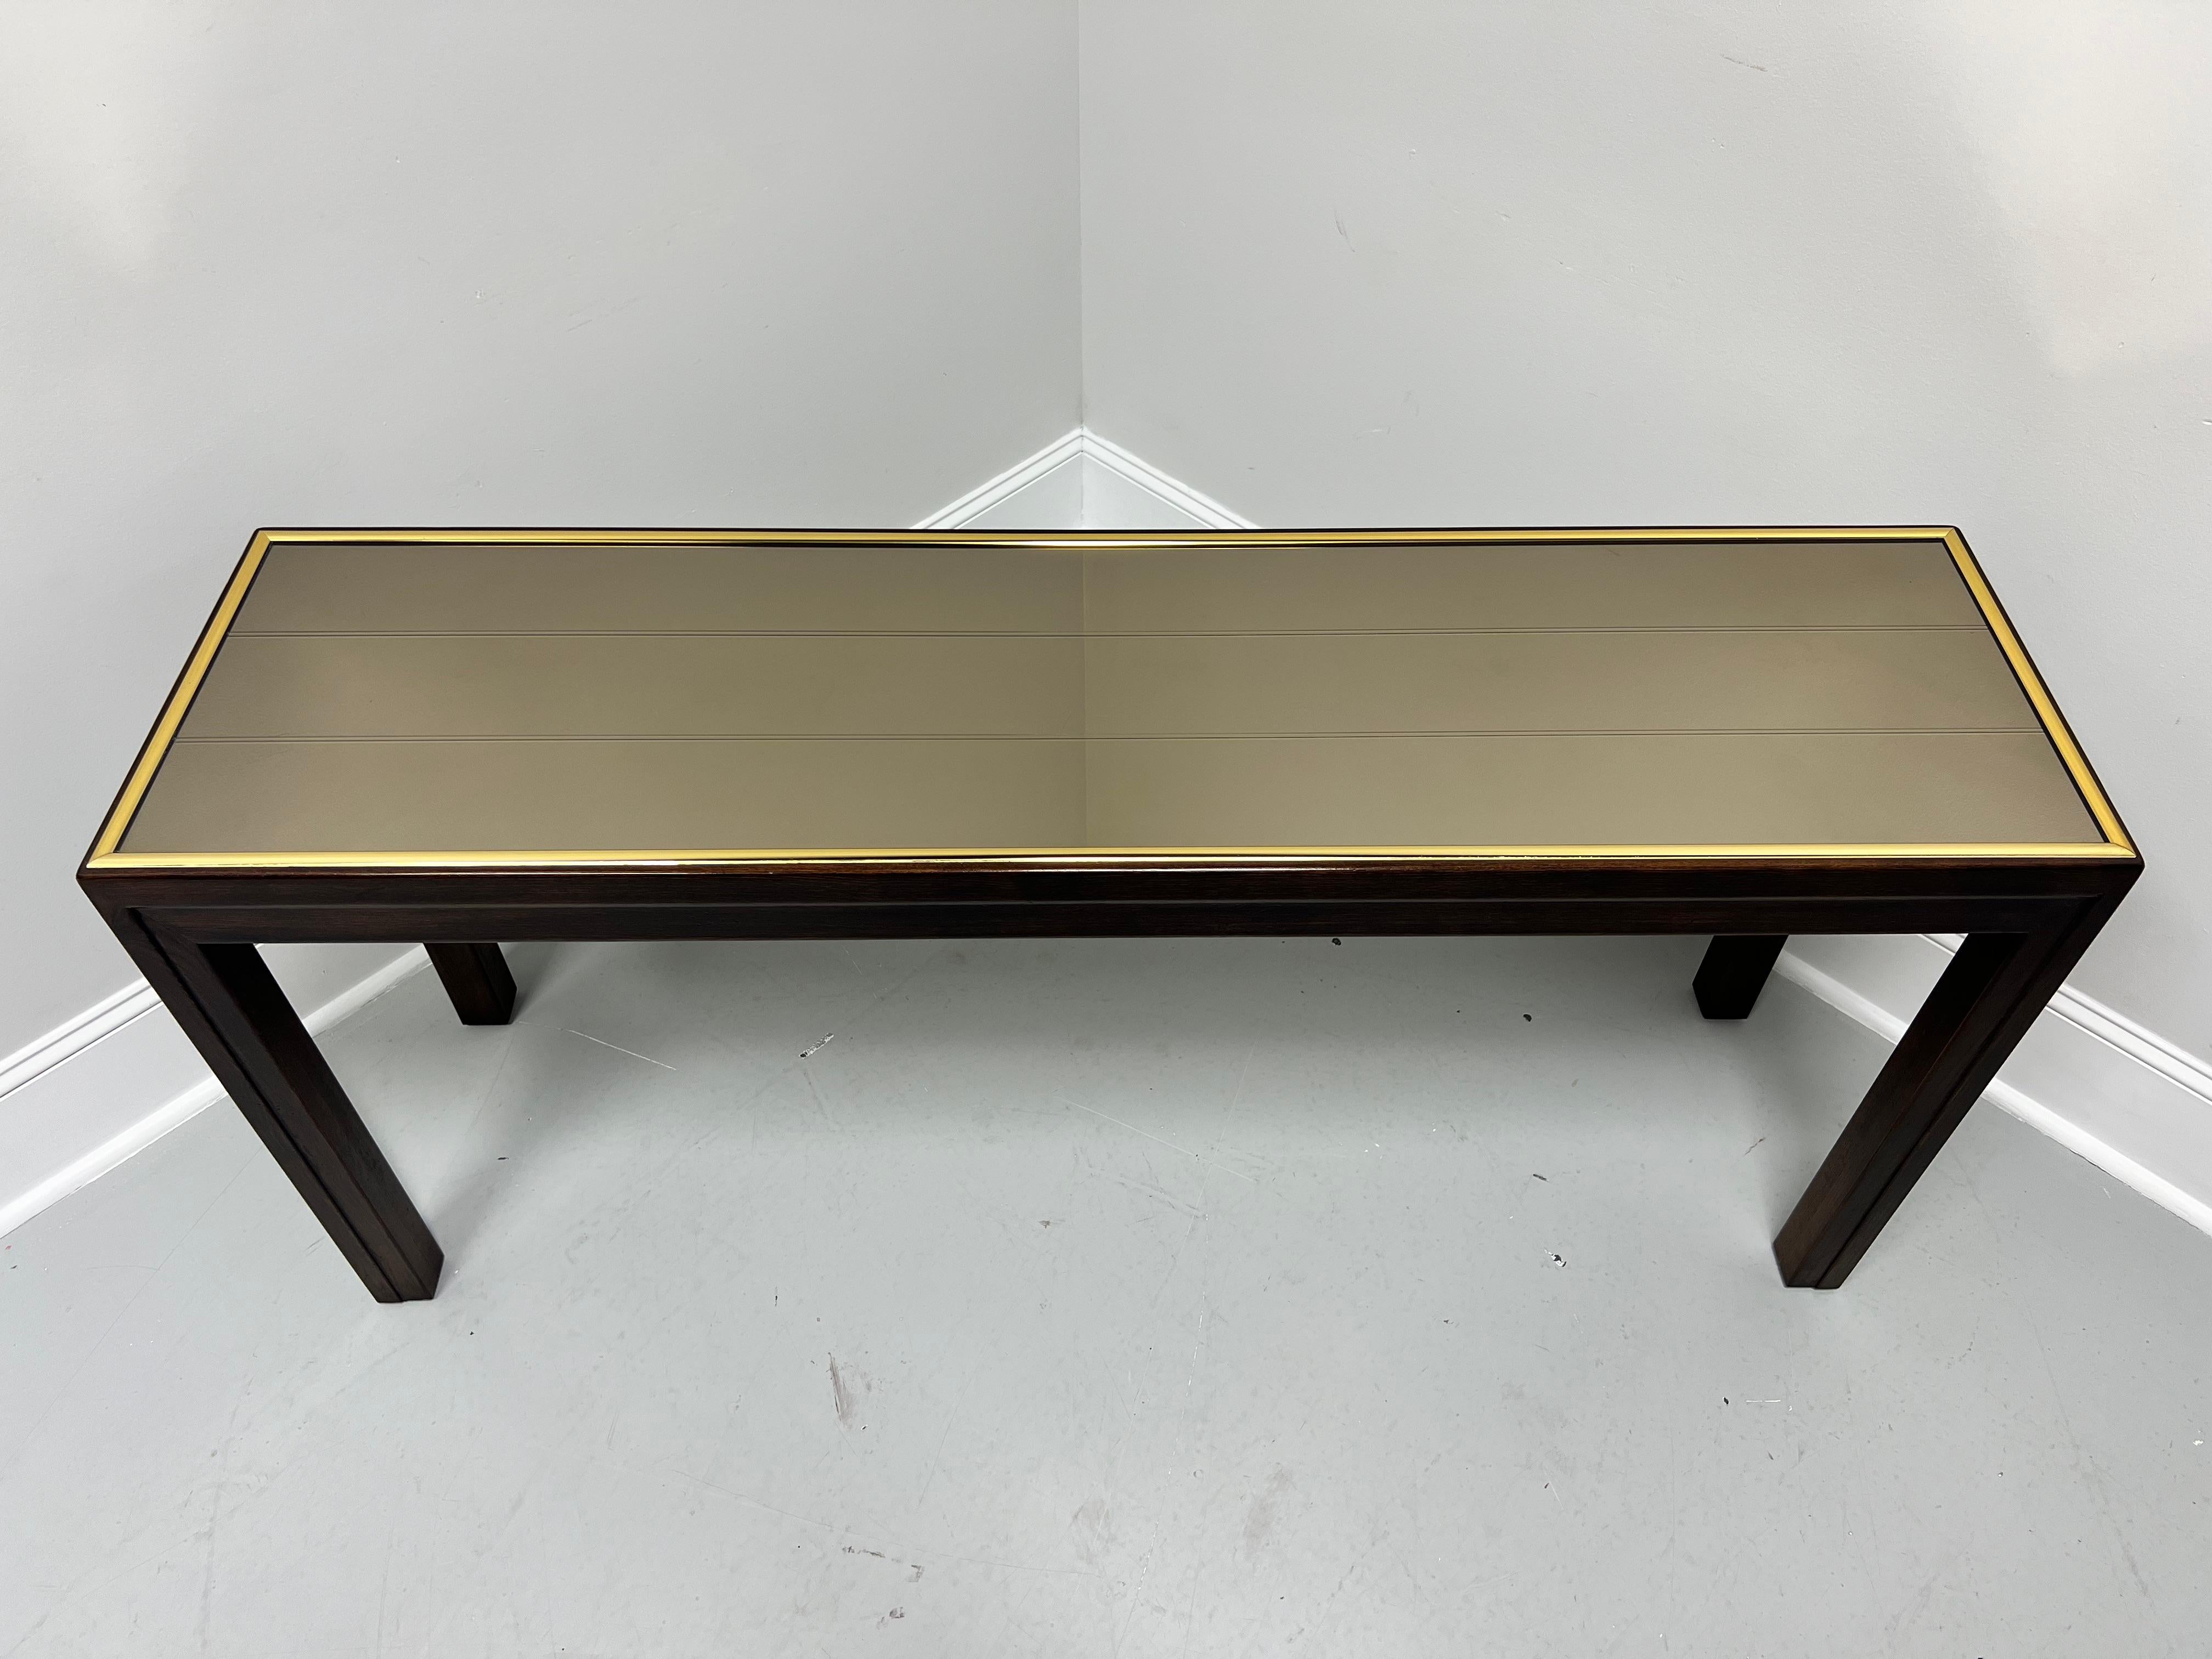 A Contemporary style sofa table by Henredon. Solid oak with a plank design mirrored top, brass banding around edge of top, slightly recessed inward apron, and slightly recessed inward square straight legs. Made in Morganton, North Carolina, USA,